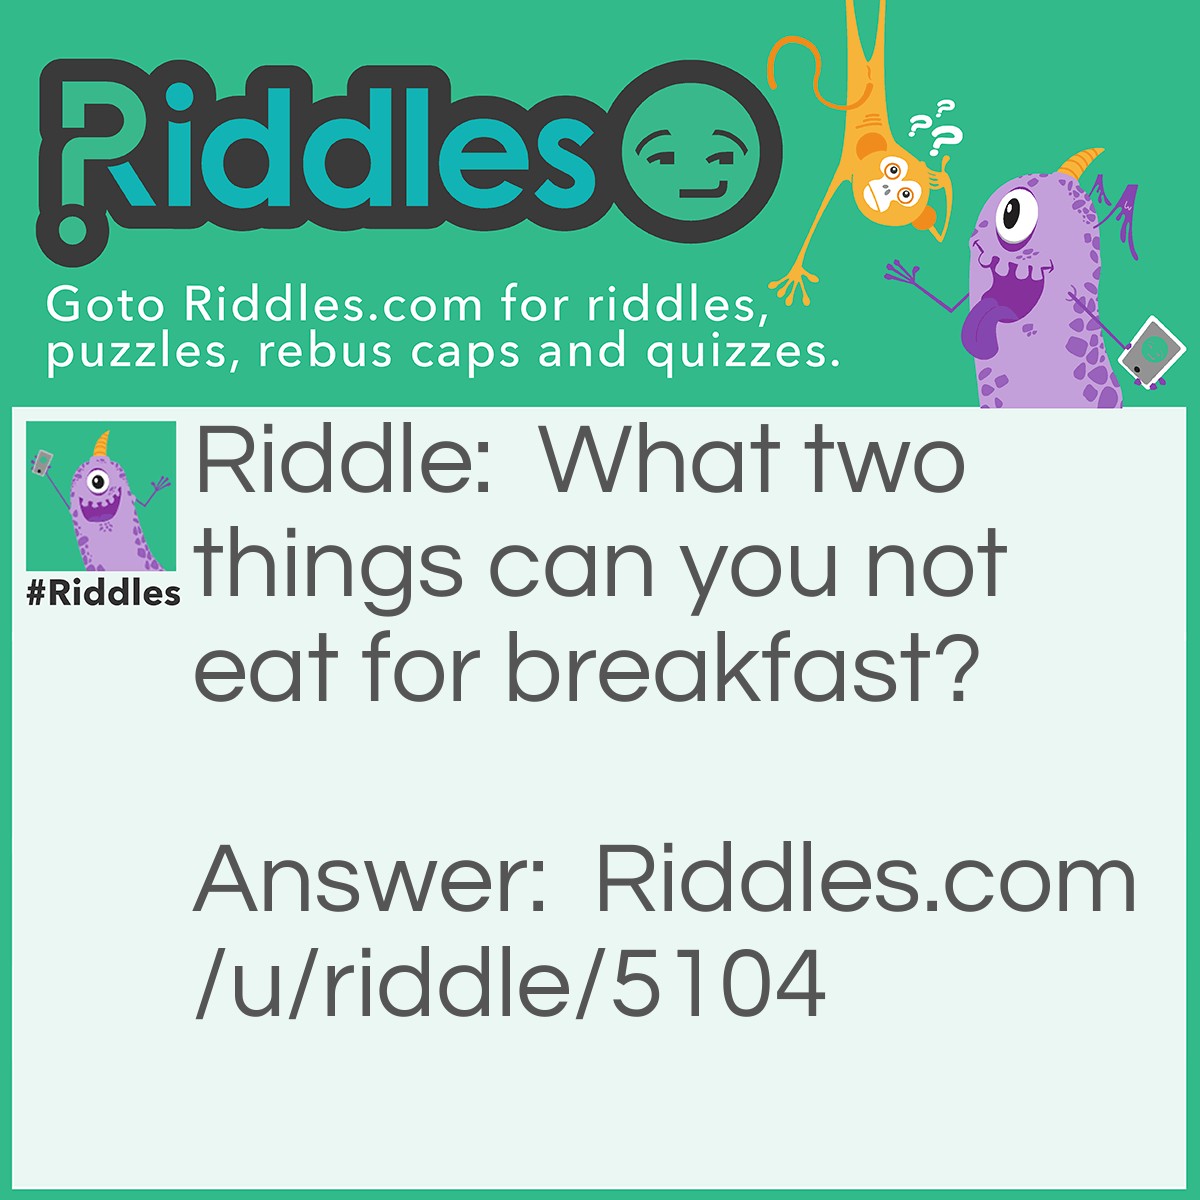 Riddle: What two things can you not eat for breakfast? Answer: Lunch and Dinner.